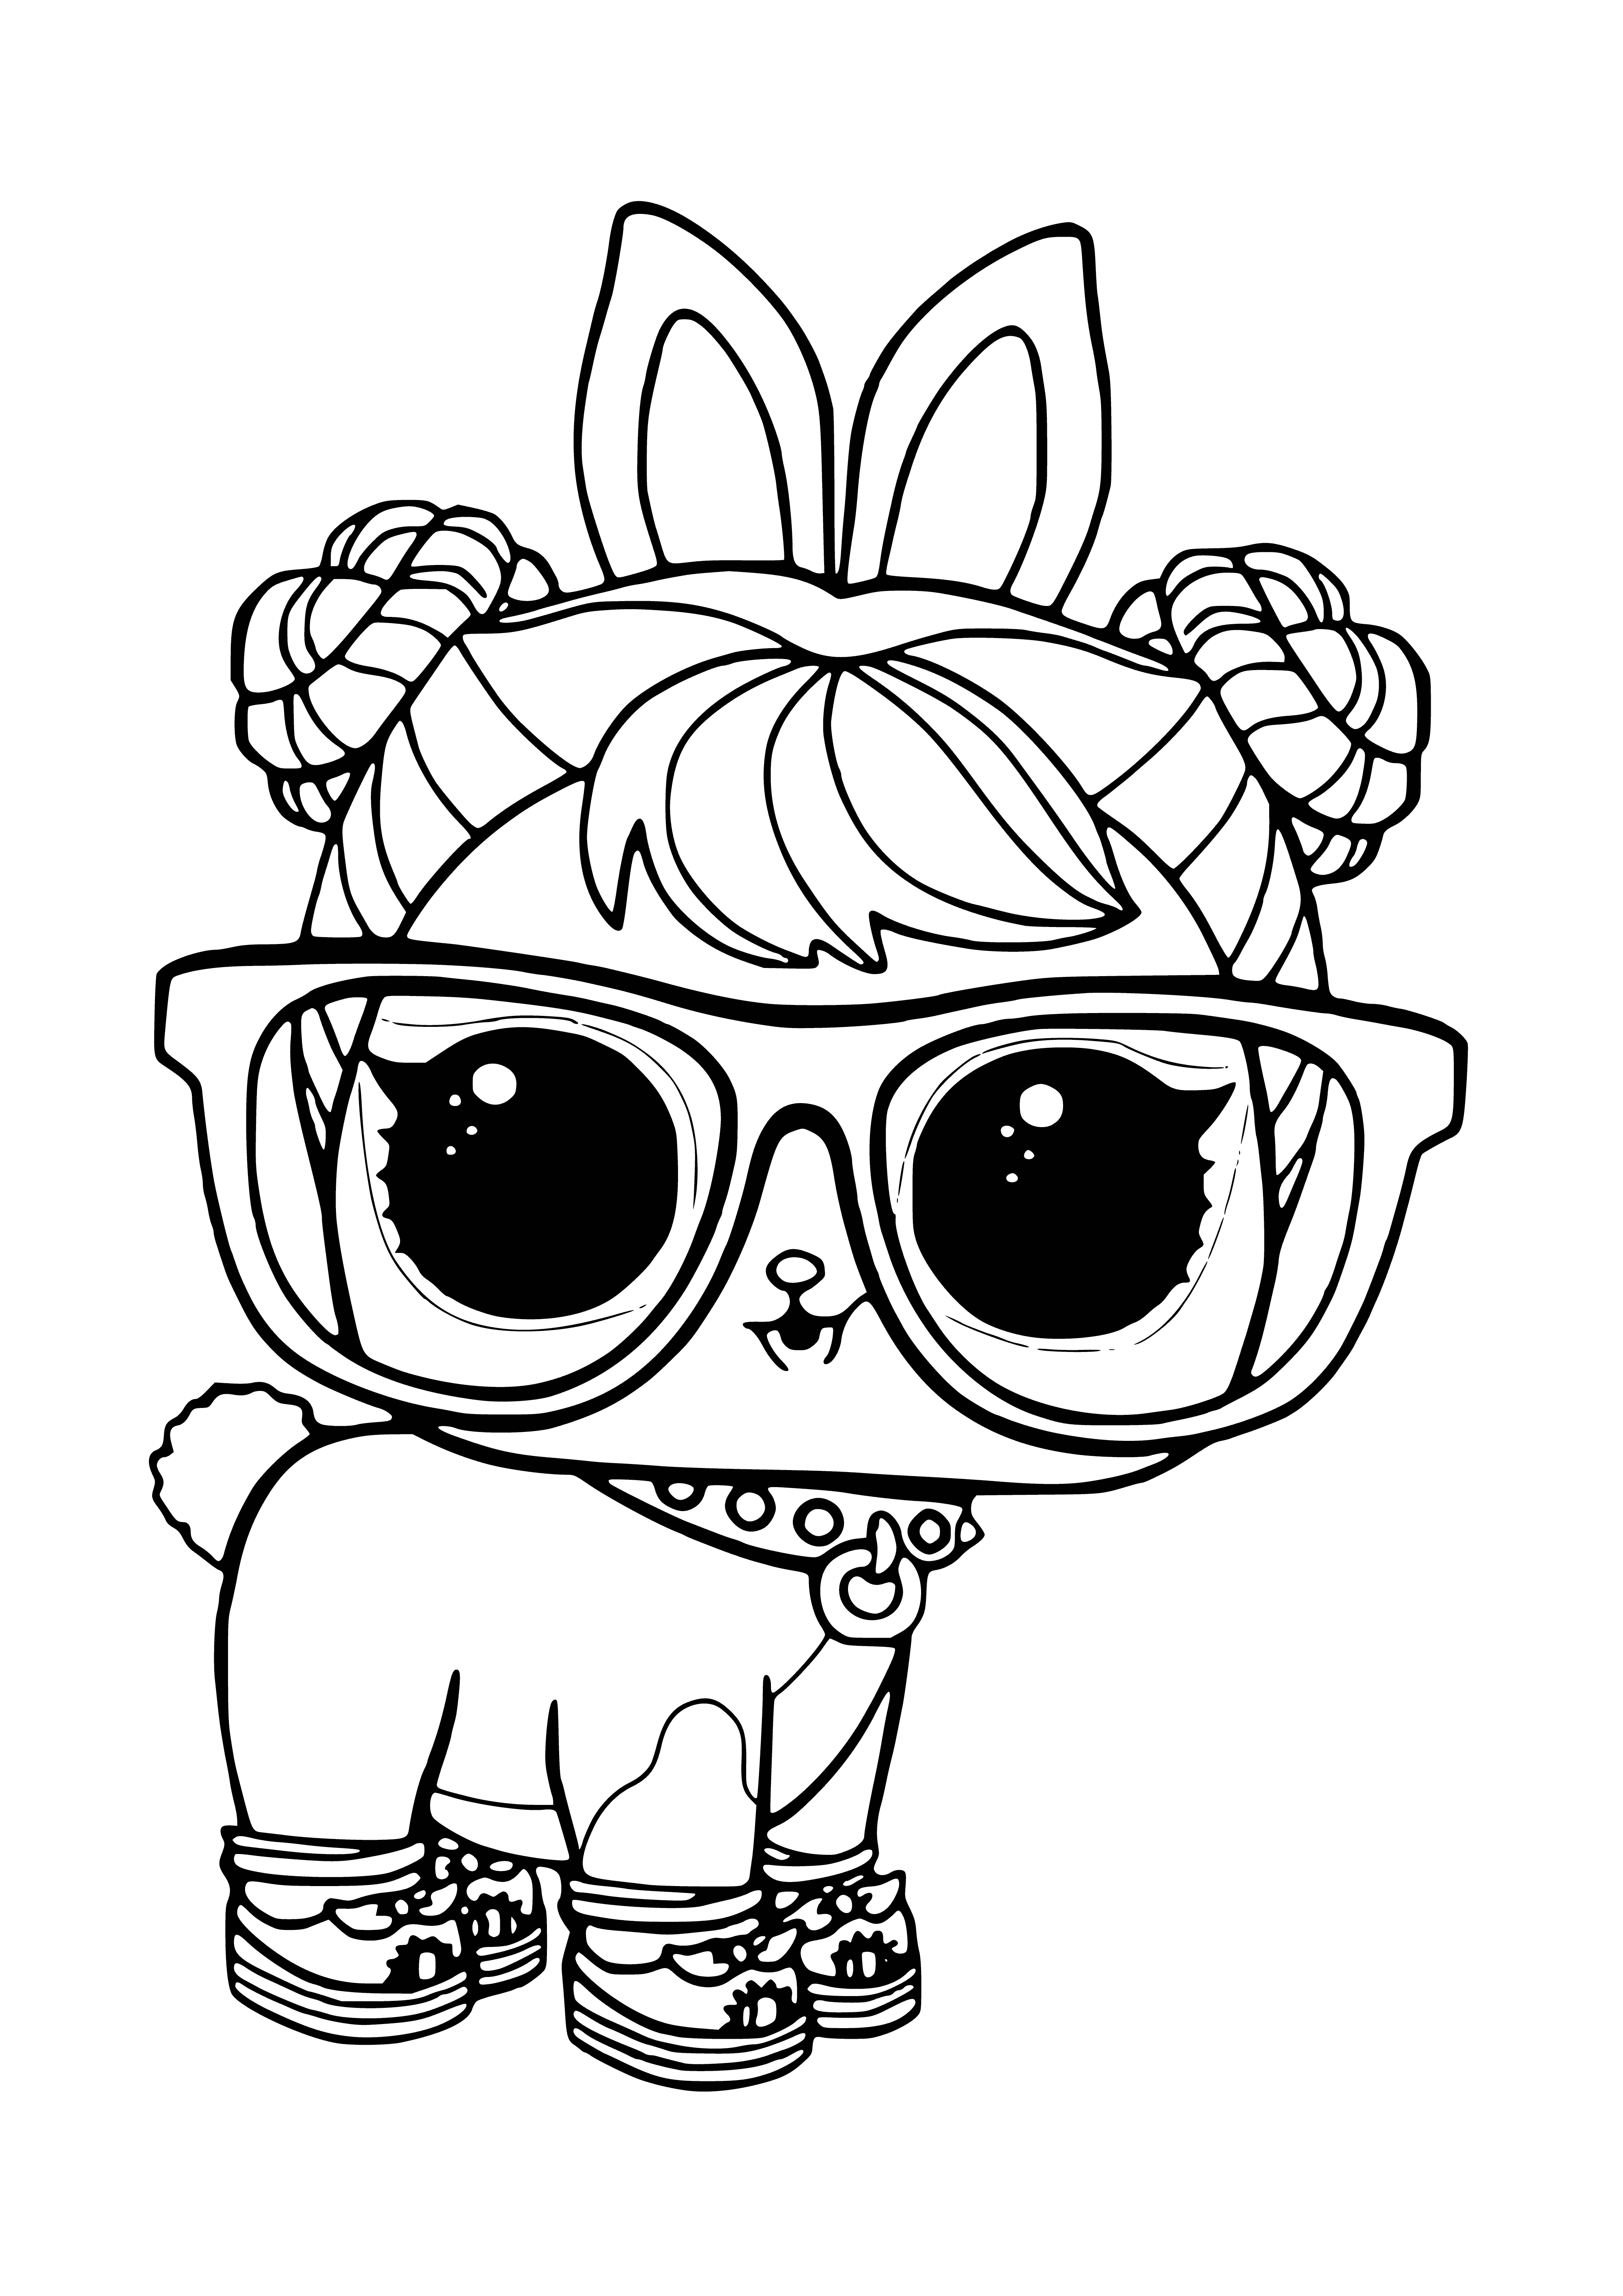 coloring page: Adorable brown and white bunny wearing a blue collar with a white bone charm. Sitting up on its hind legs with front paws together and head tilted.